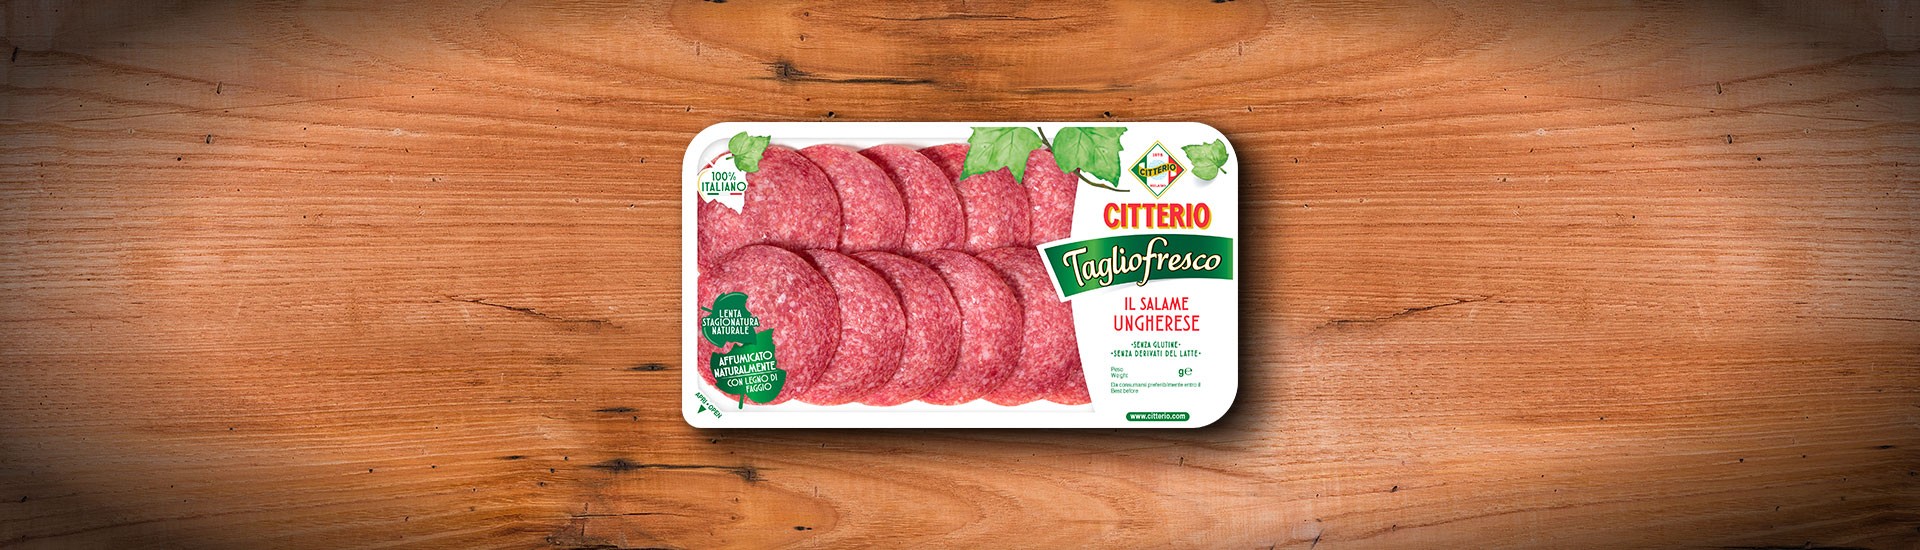 Salame Ungherese 